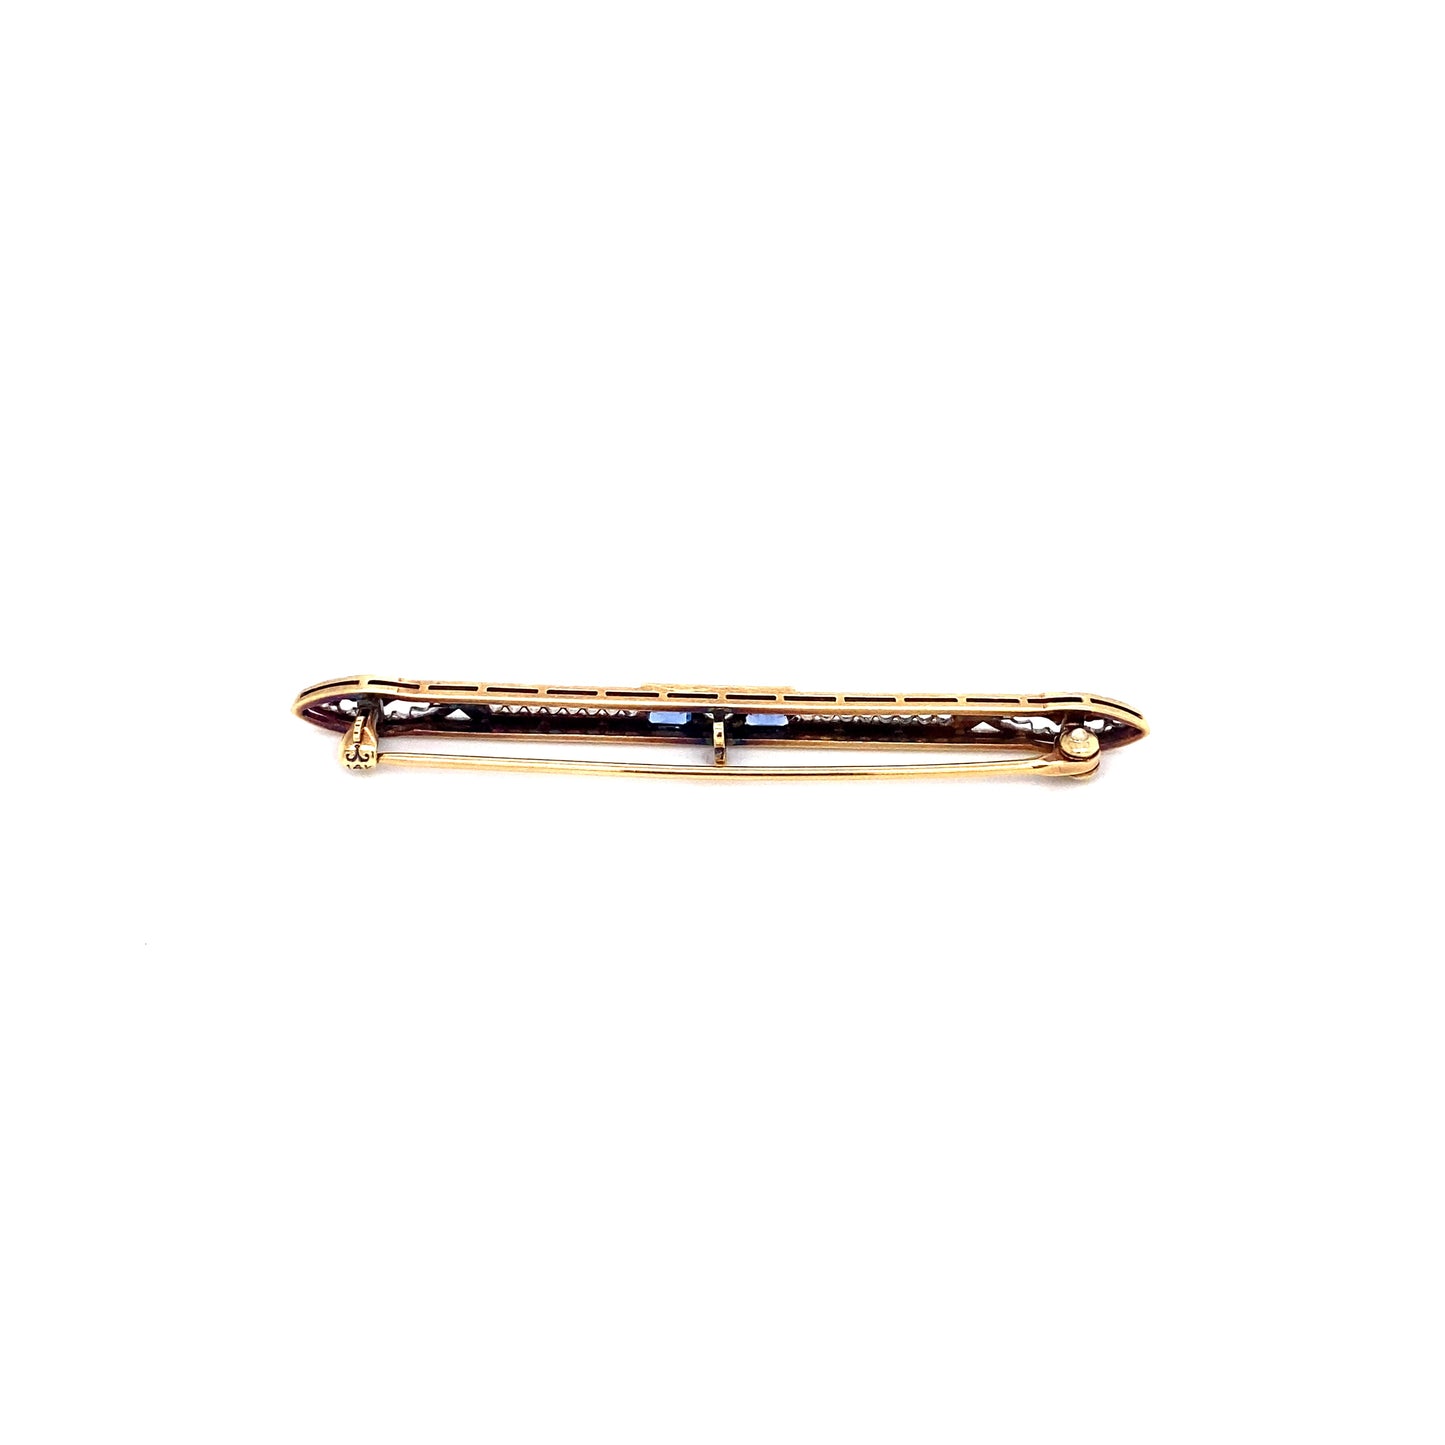 Circa 1920s Art Deco Diamond and Sapphire Bar Brooch in 14K Gold and Platinum